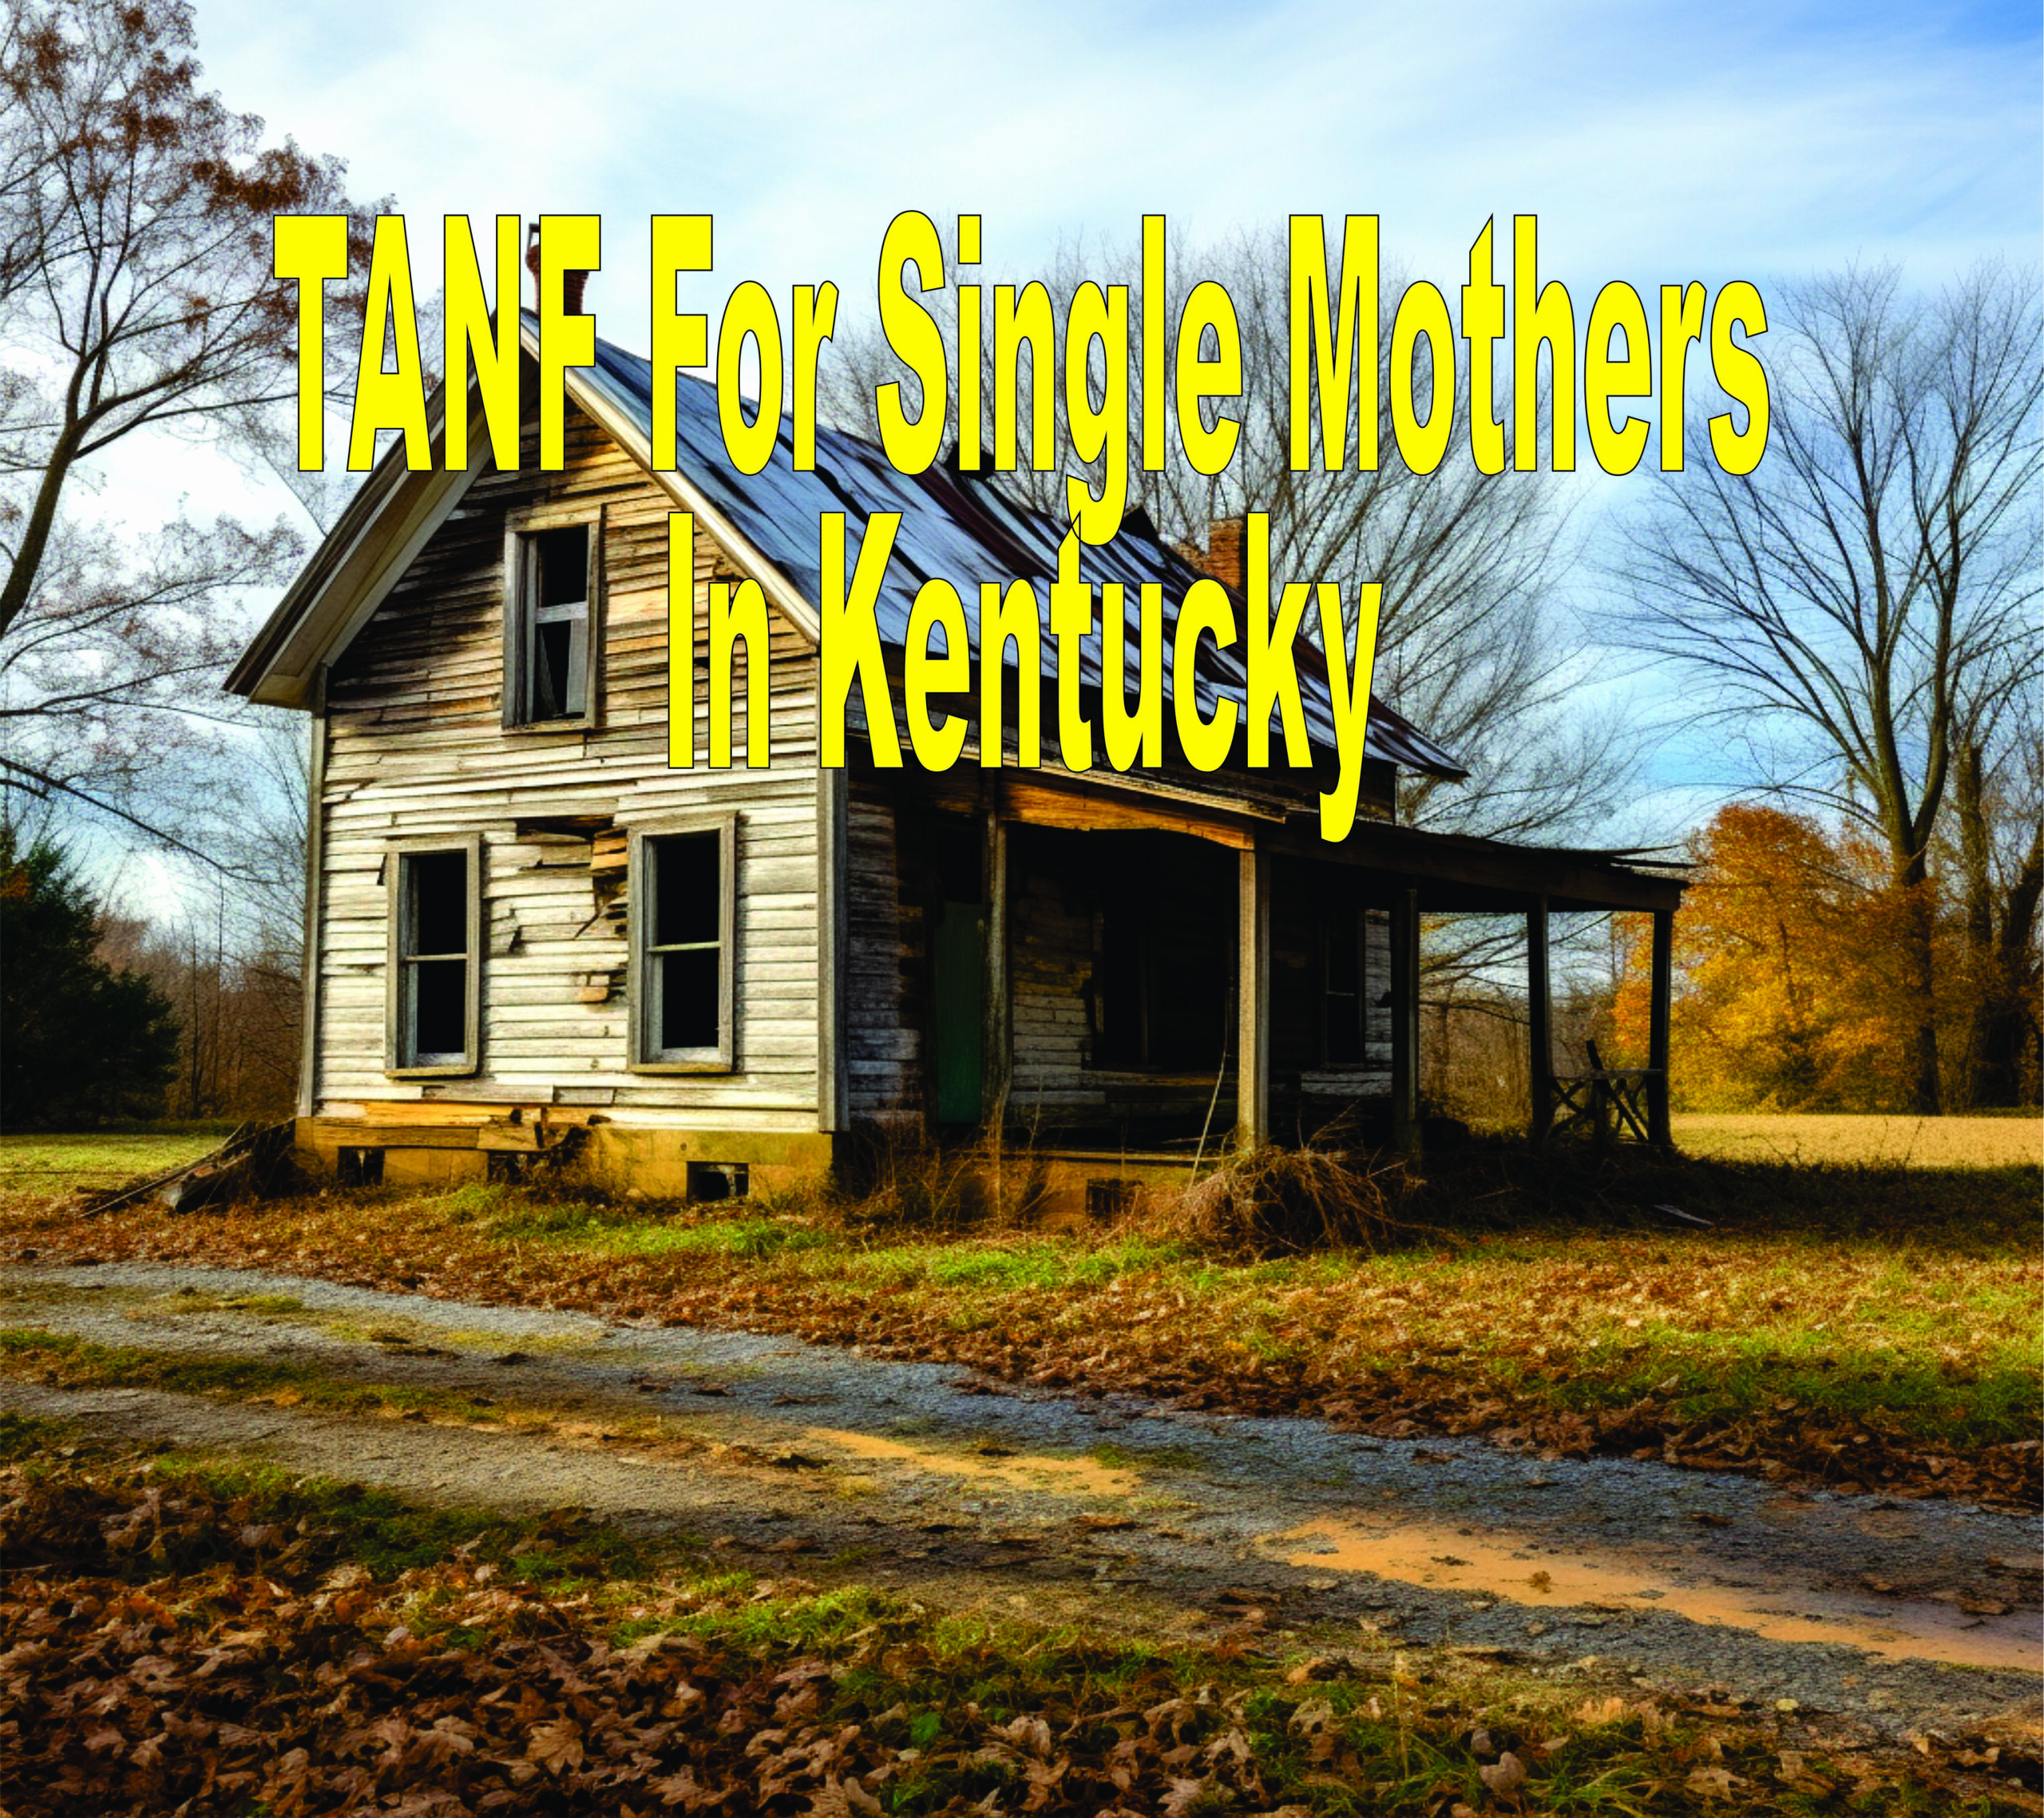 Tanf For Single Mothers In Kentucky